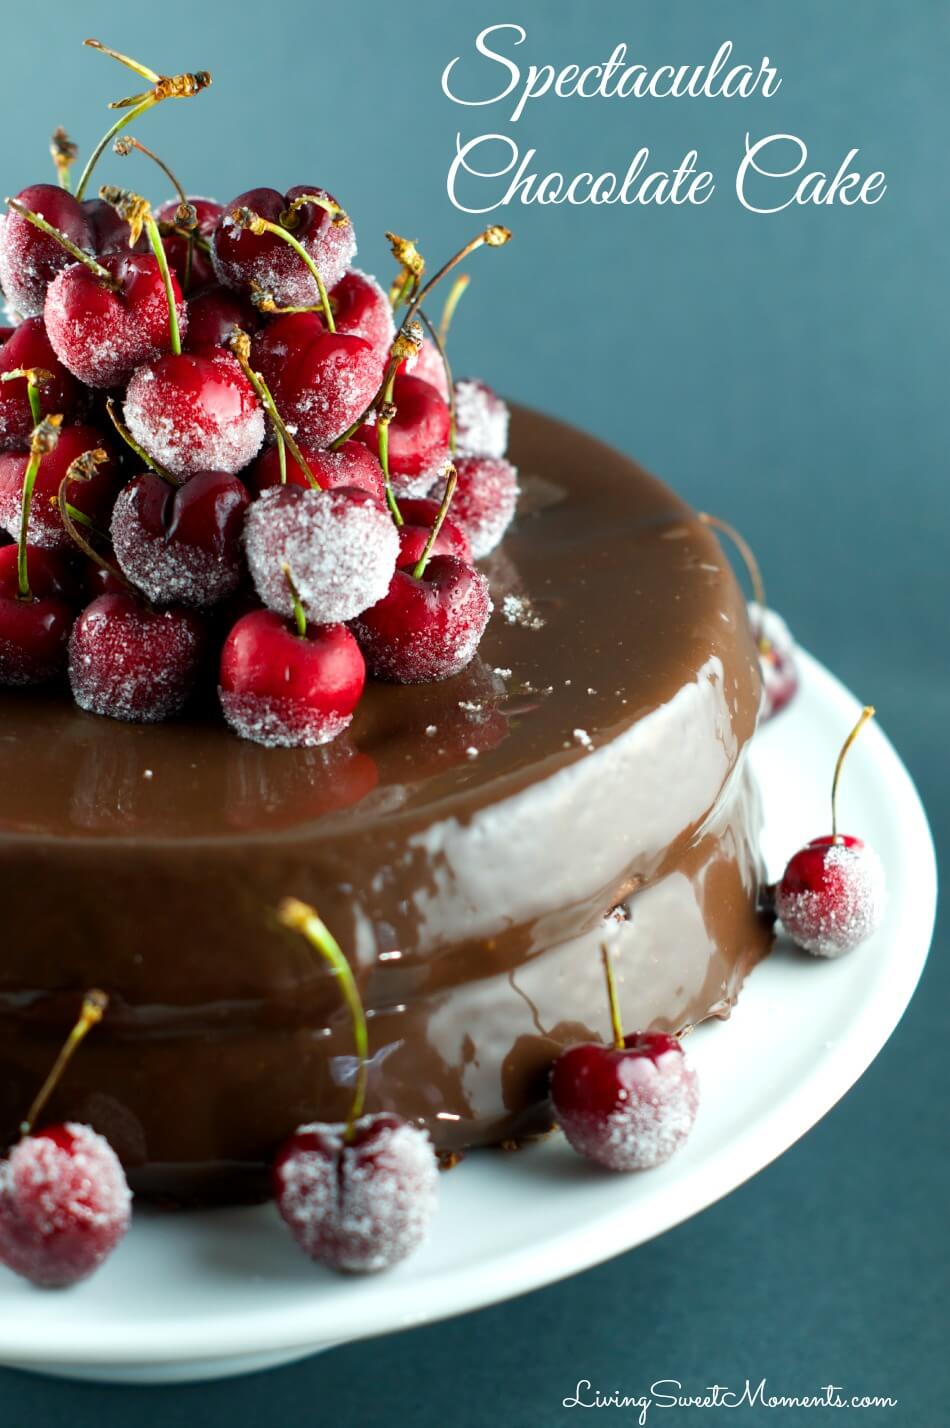 Spectacular Chocolate Cake from Living Sweet Moments